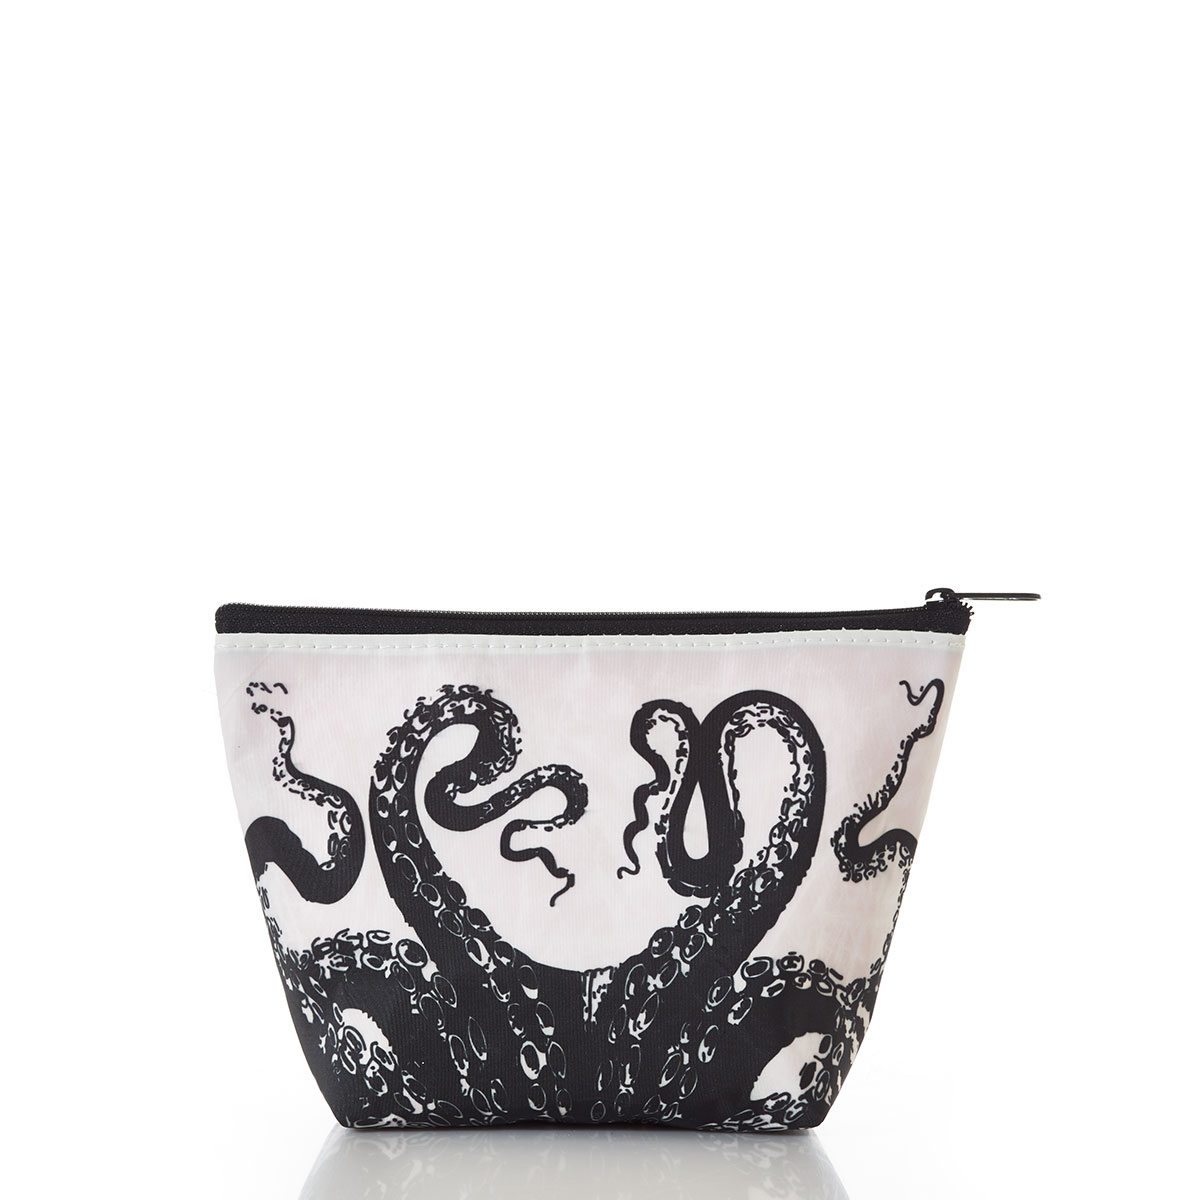 Octopus Large Cosmetic Bag